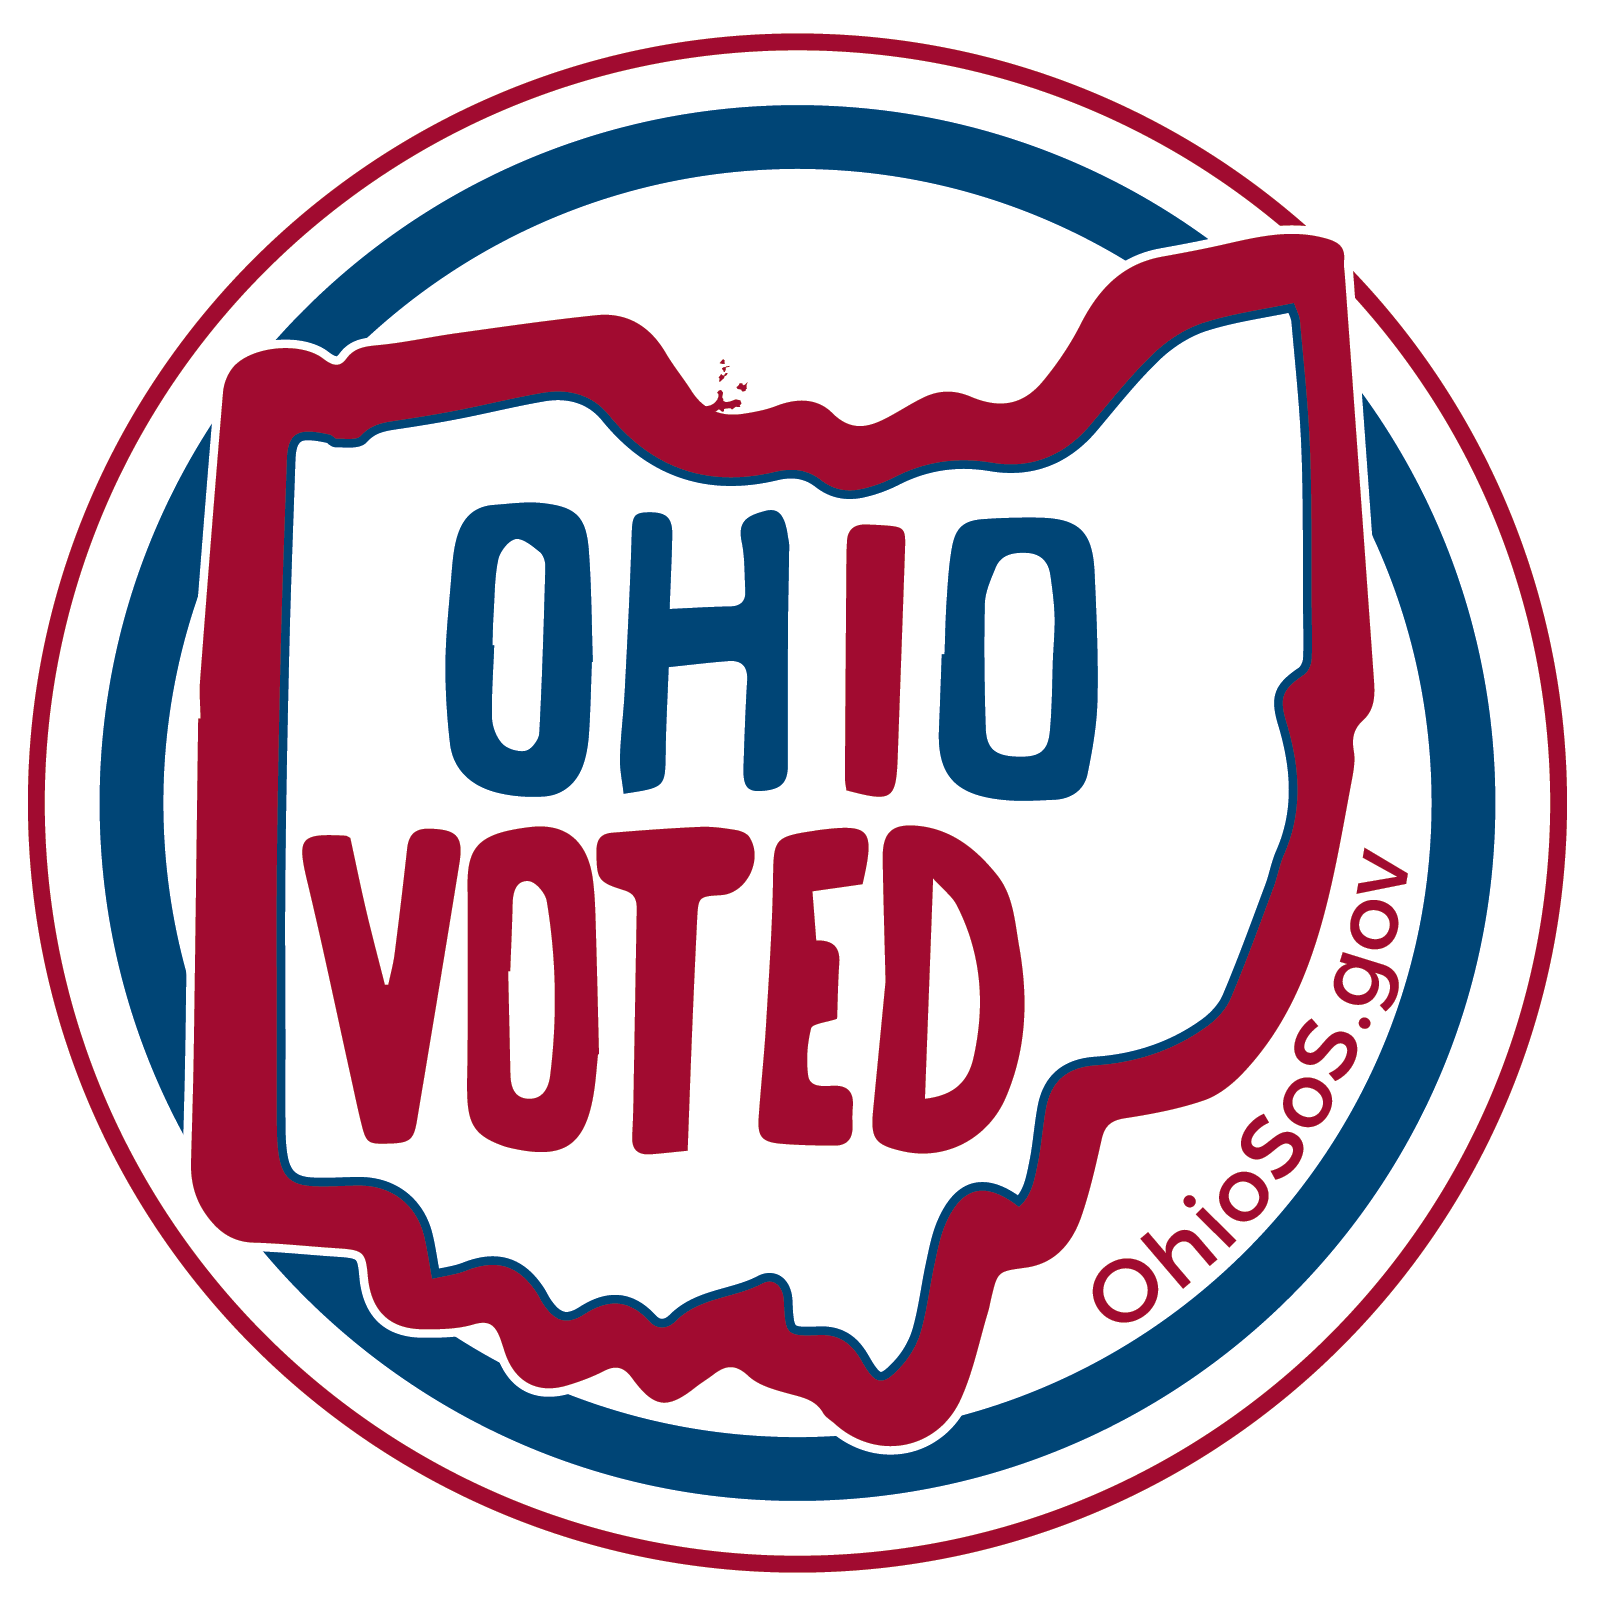 New Ohio I Voted Sticker, Hd Png Download